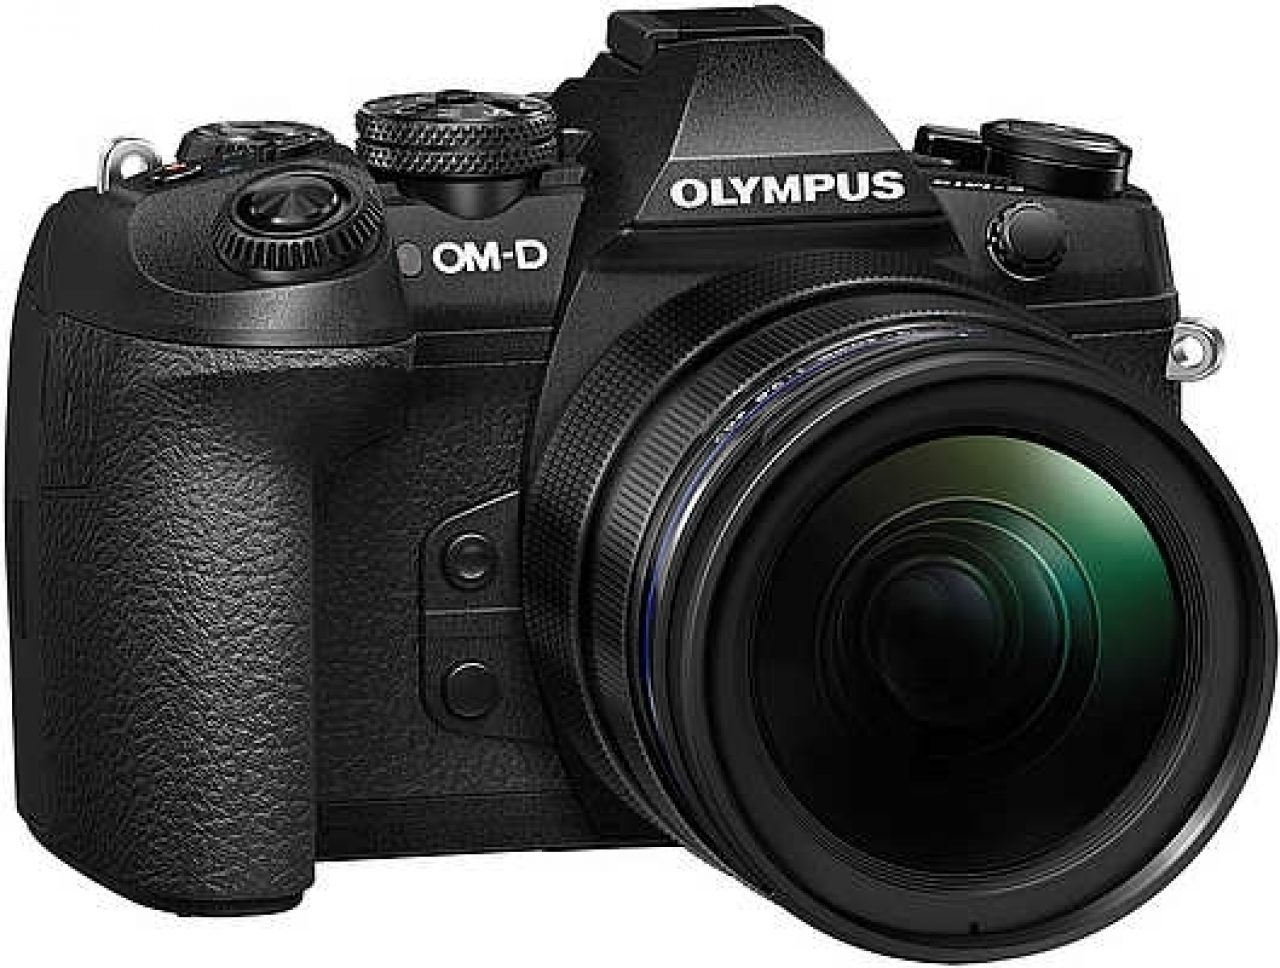 Olympus OM-D E-M1 II Review | Photography Blog